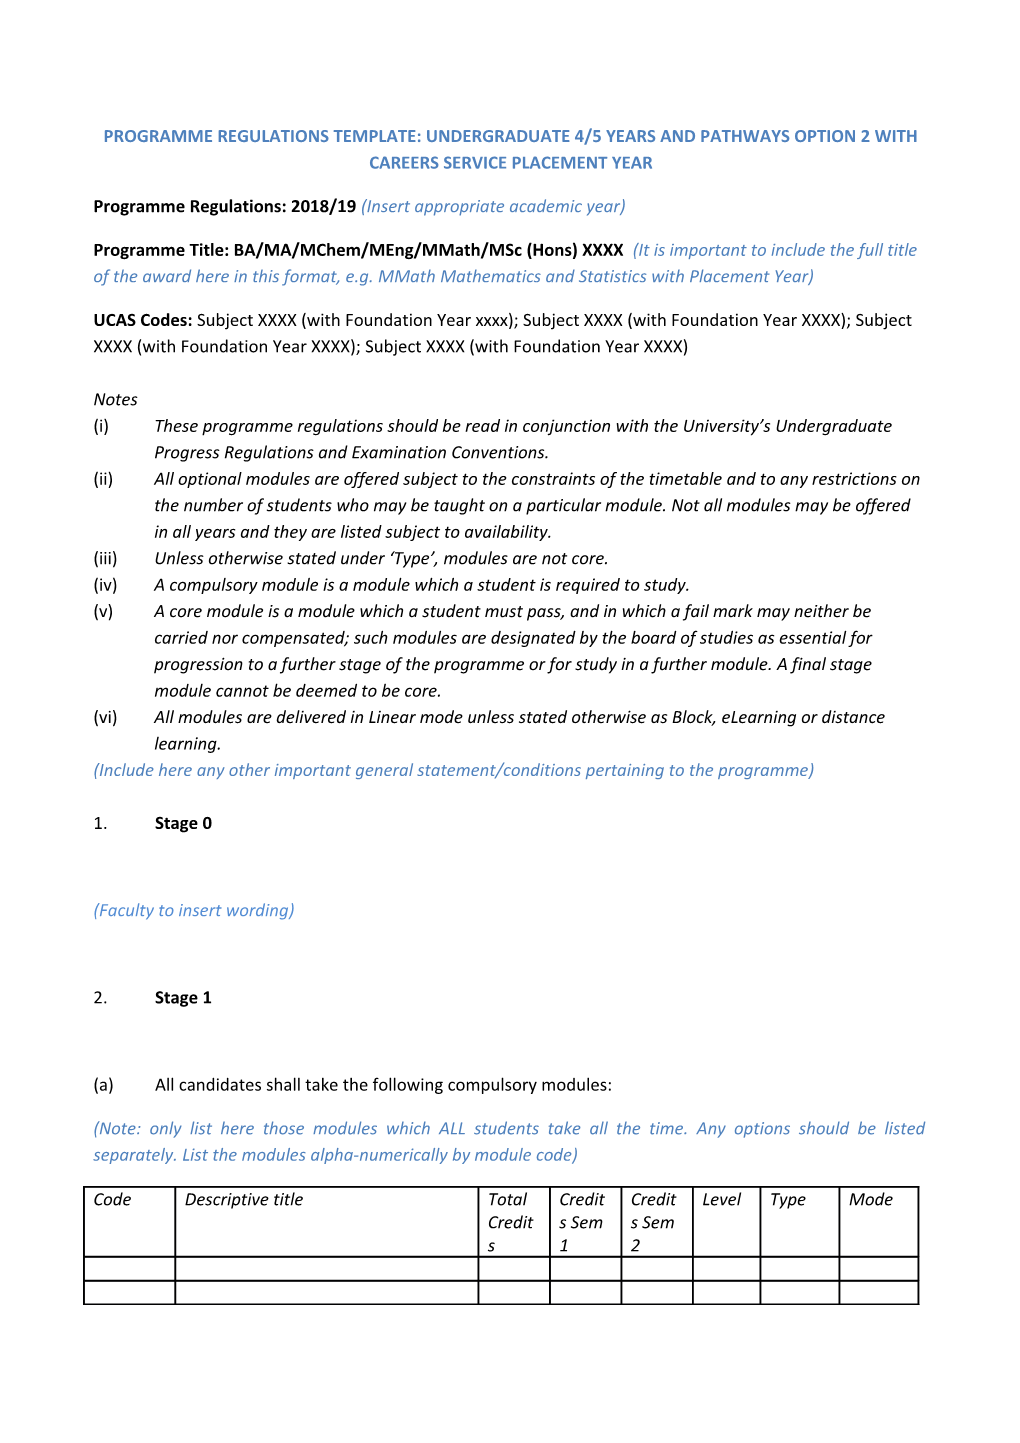 Programme Regulations Template: Undergraduate 4/5 Years and Pathways Option 2 with Careers